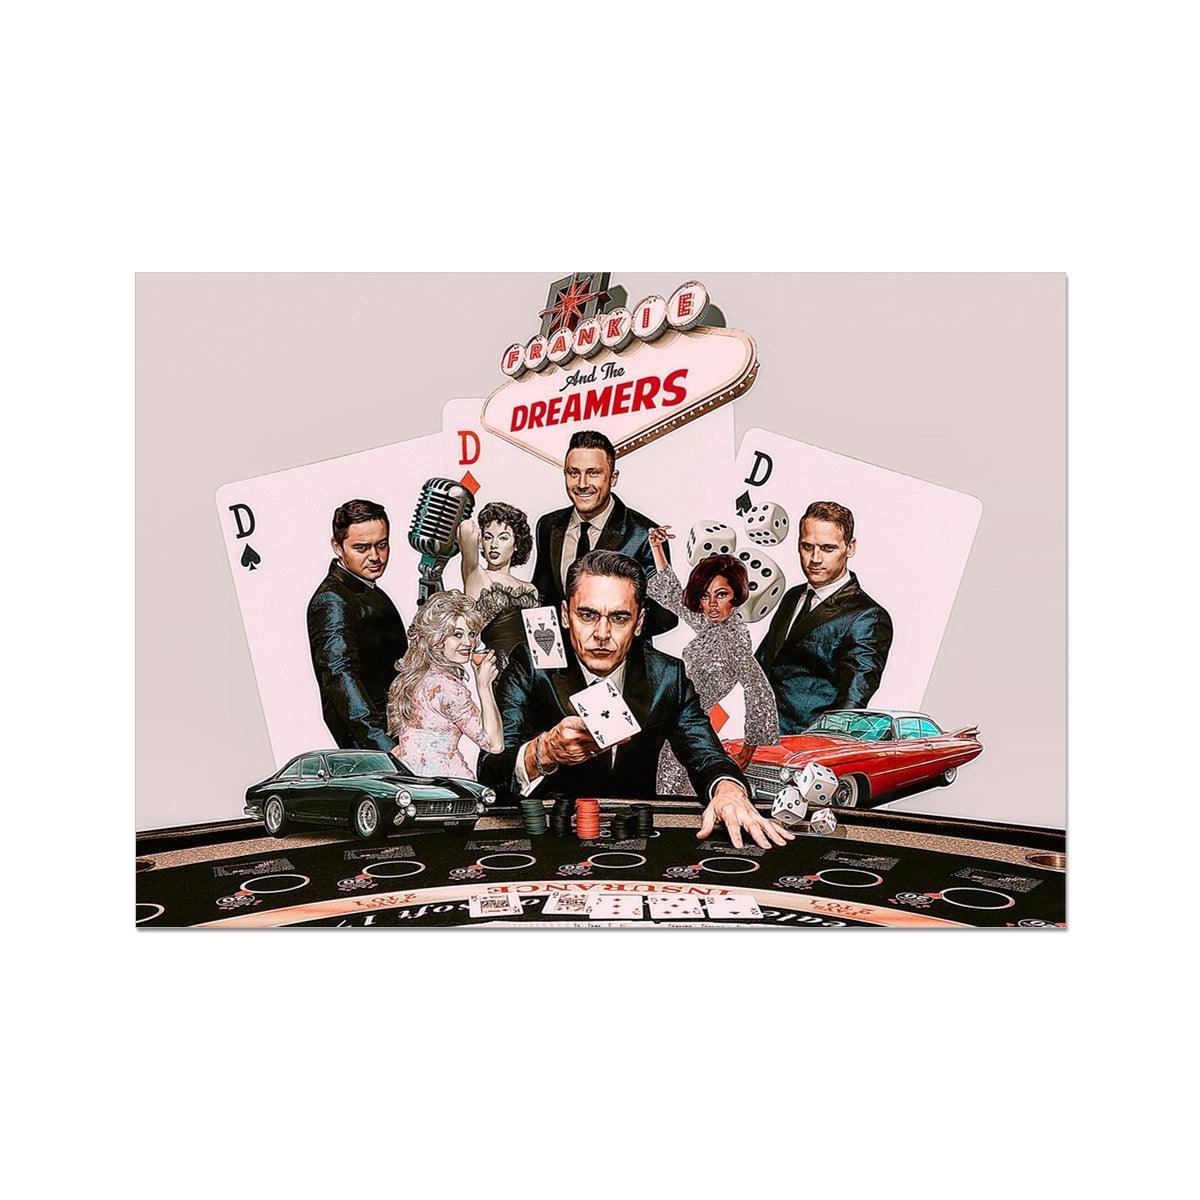 Frankie And The Dreamers Casino Wall Art Poster | Art Prints A2 Landscape